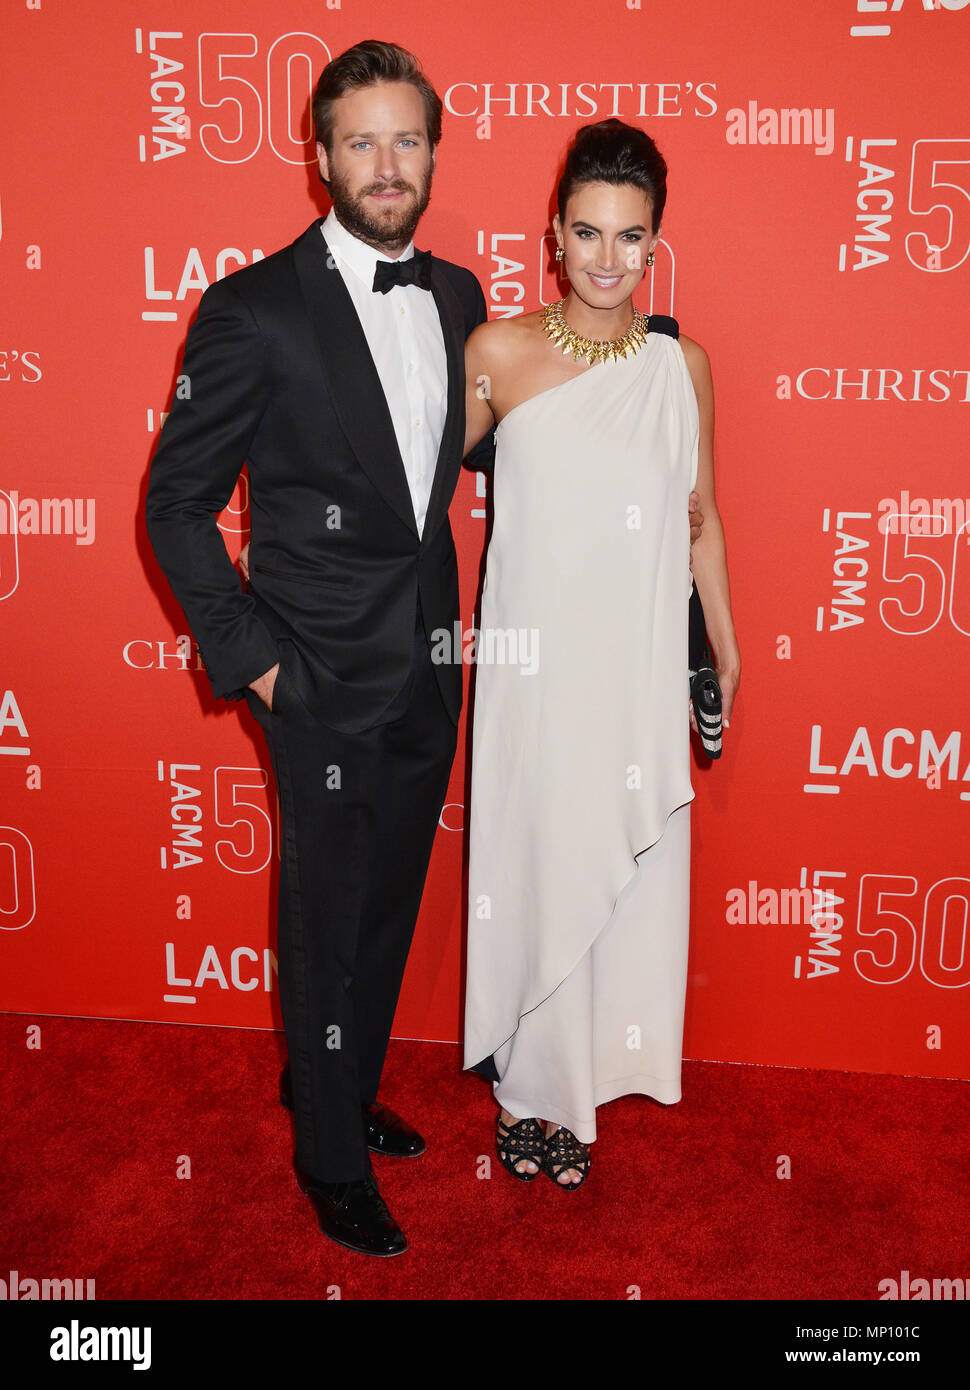 Armie Hammer and Wife Elizabeth Chambers 049 at the  LACMA 50th Ann. Gala 2015 at the LACMA Museum in Los Angeles. April 18, 2015.Armie Hammer and Wife Elizabeth Chambers 049 ------------- Red Carpet Event, Vertical, USA, Film Industry, Celebrities,  Photography, Bestof, Arts Culture and Entertainment, Topix Celebrities fashion /  Vertical, Best of, Event in Hollywood Life - California,  Red Carpet and backstage, USA, Film Industry, Celebrities,  movie celebrities, TV celebrities, Music celebrities, Photography, Bestof, Arts Culture and Entertainment,  Topix, vertical,  family from from the ye Stock Photo